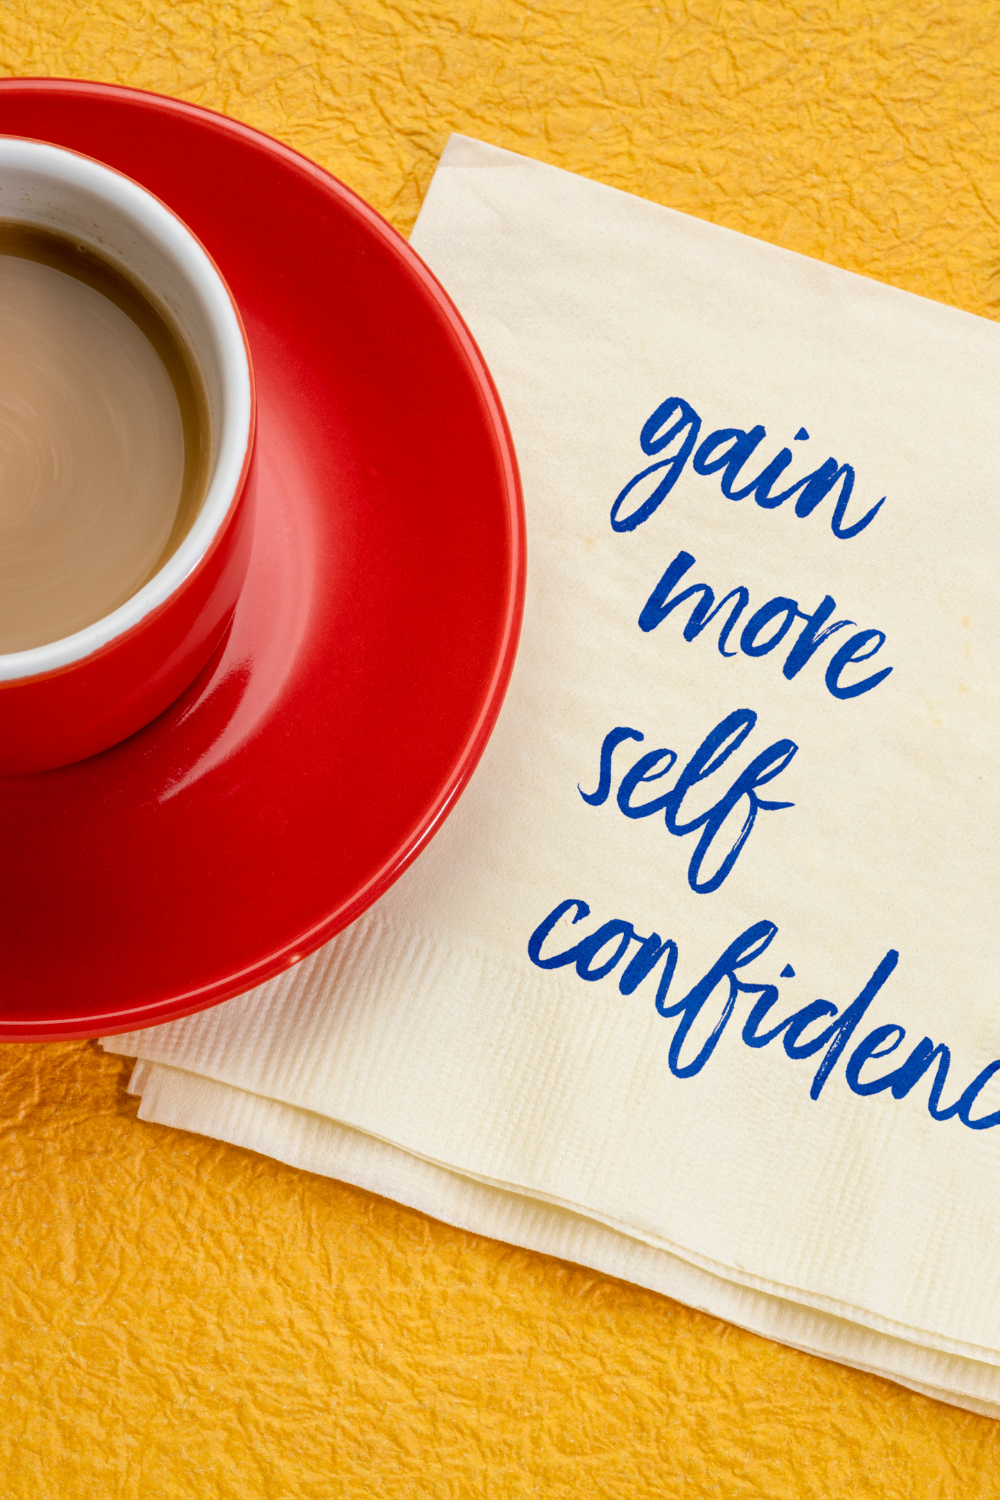 5 Proven Ways to Help Bring Back Your Self-Confidence